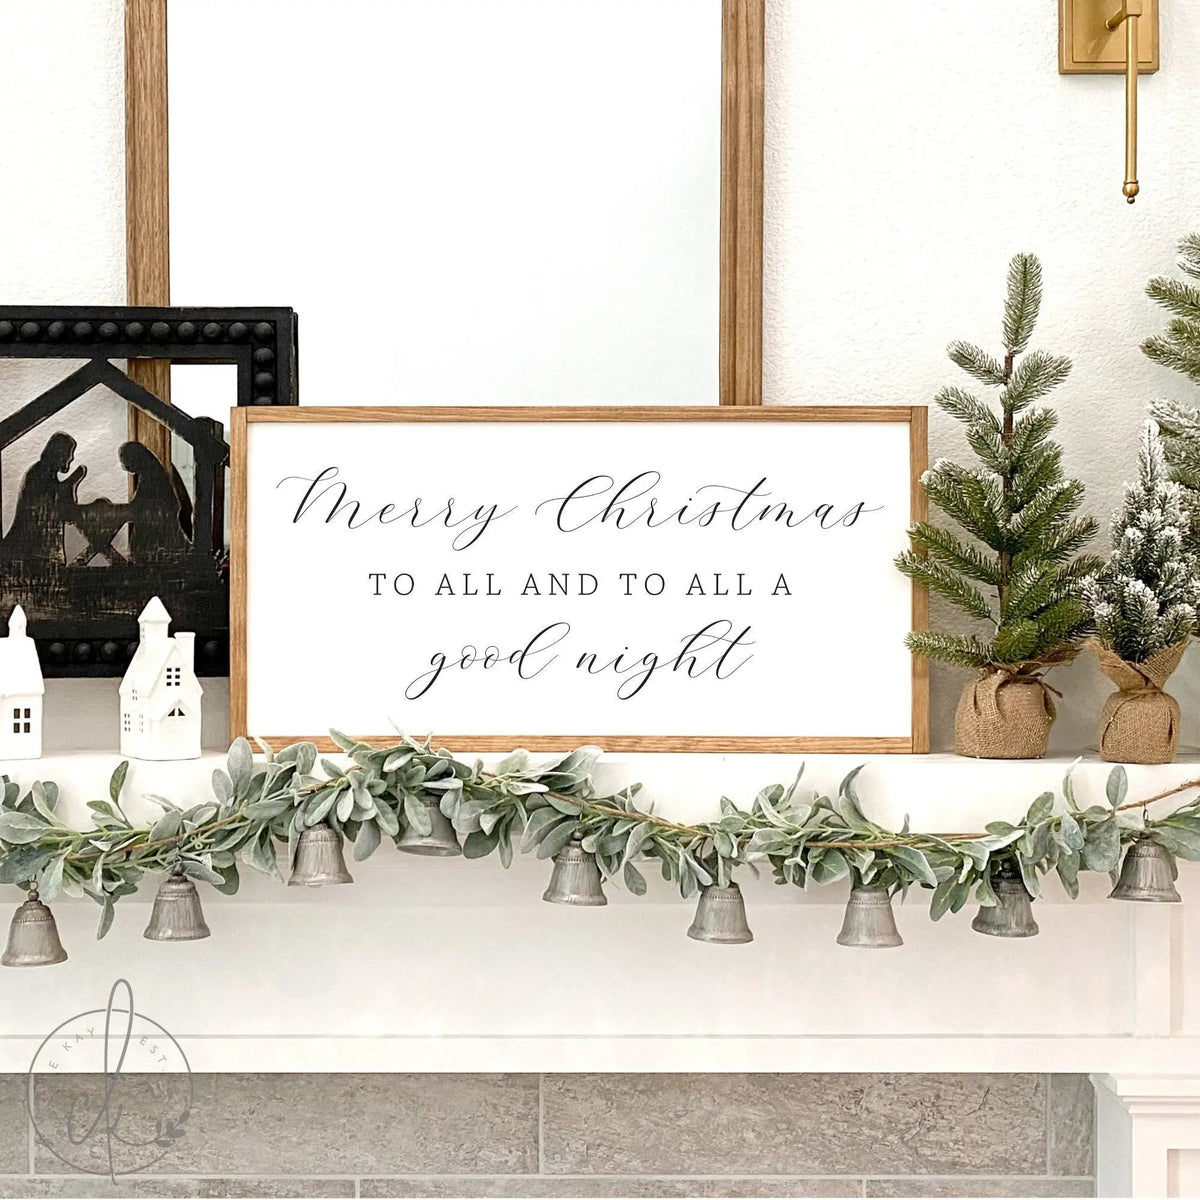 Merry Christmas to all and to all a good night sign | christmas sign |  christmas wall decor | christmas home decor | wood framed sign